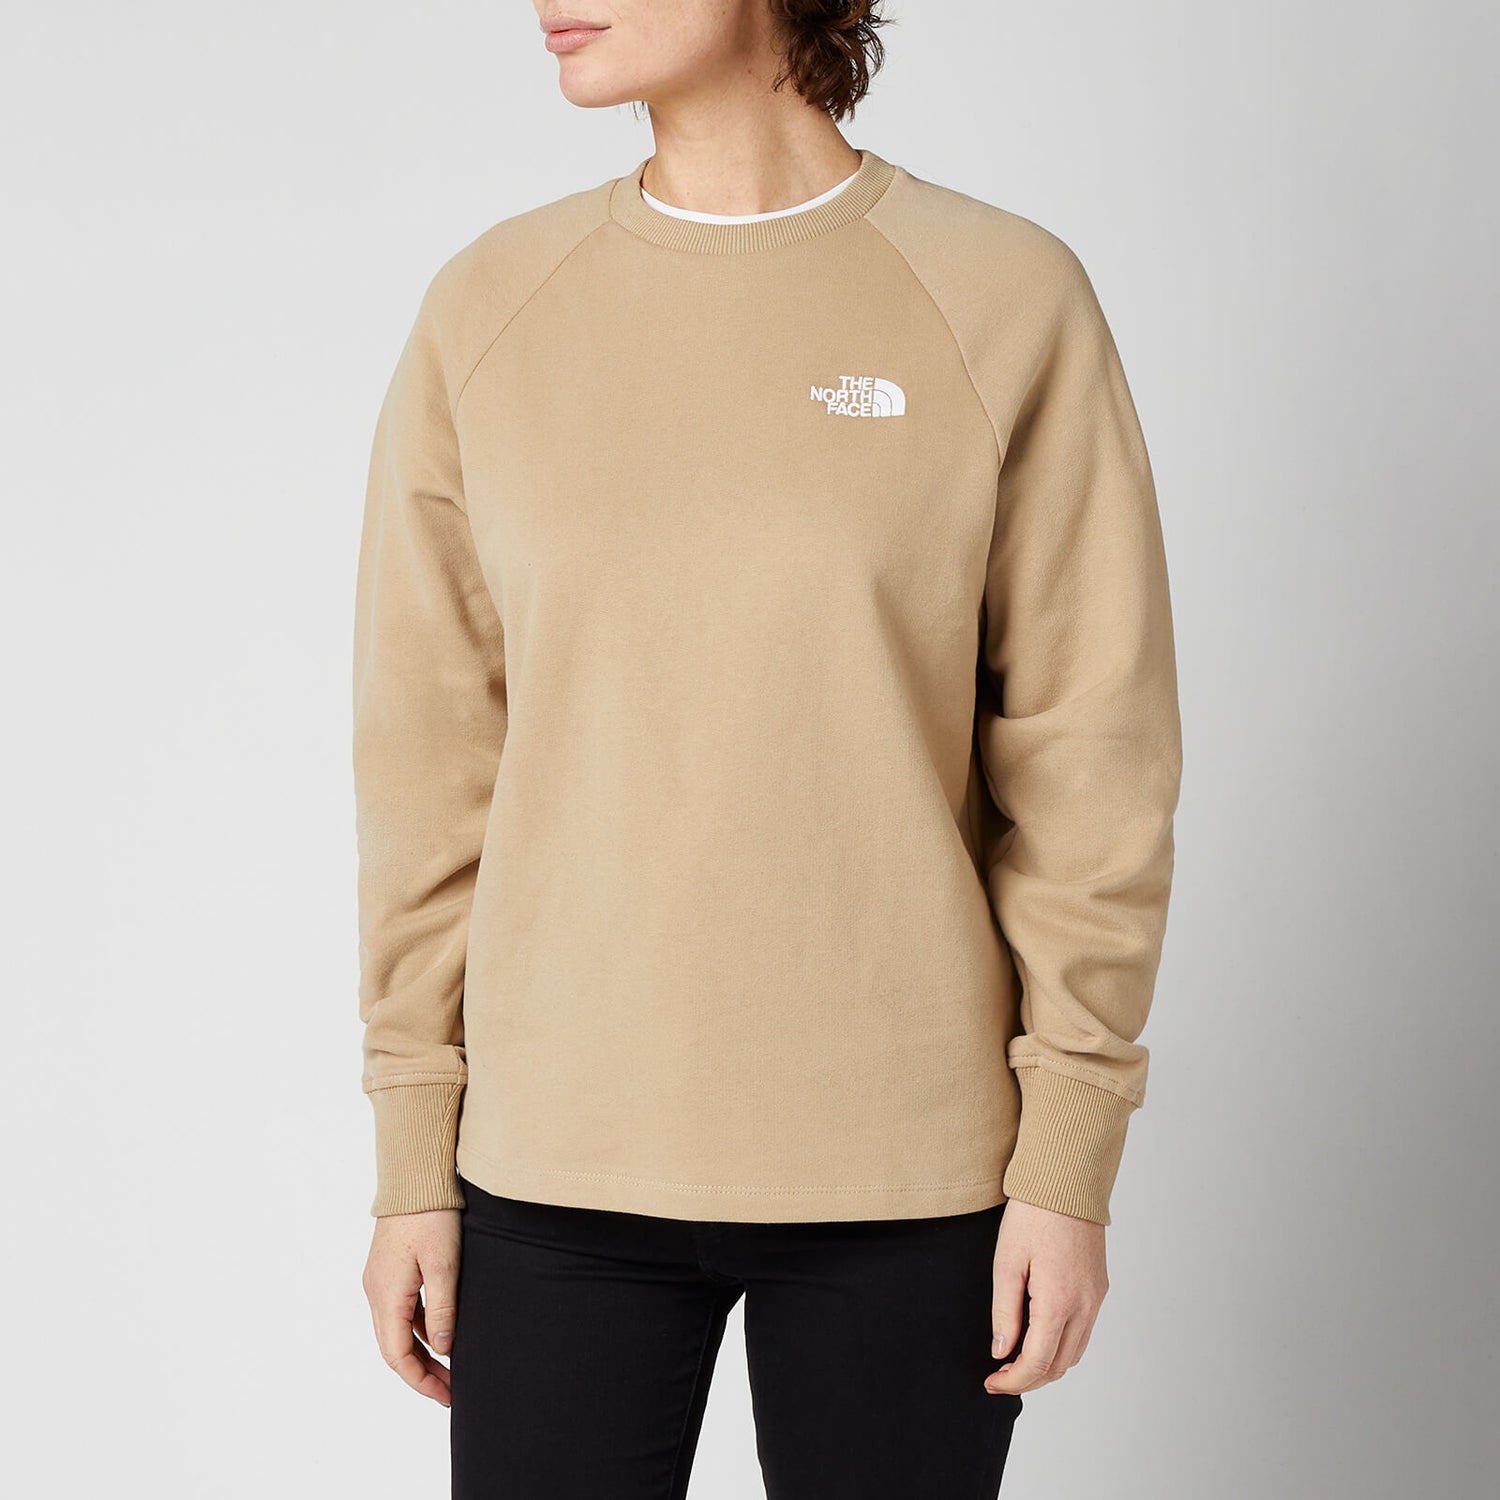 The North Face Women's Oversized Crew - Beige